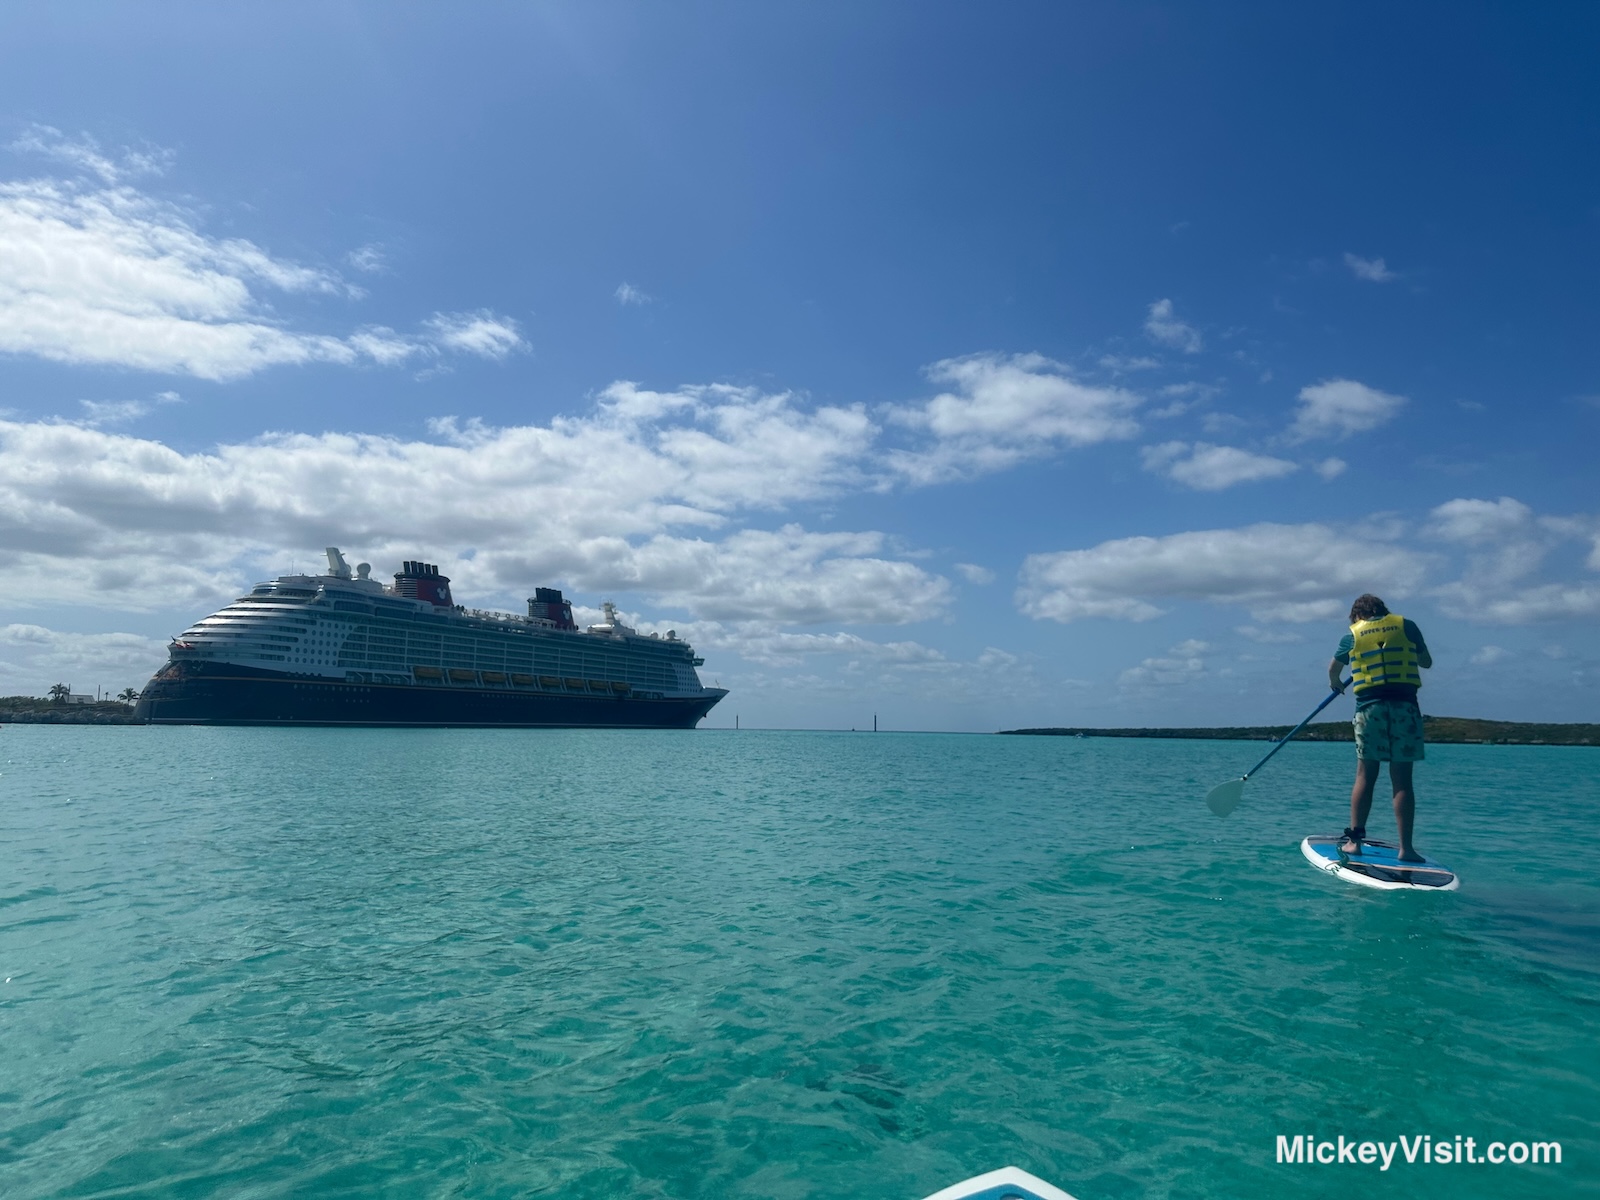 Paddleboarding in front of Disney Cruise ship